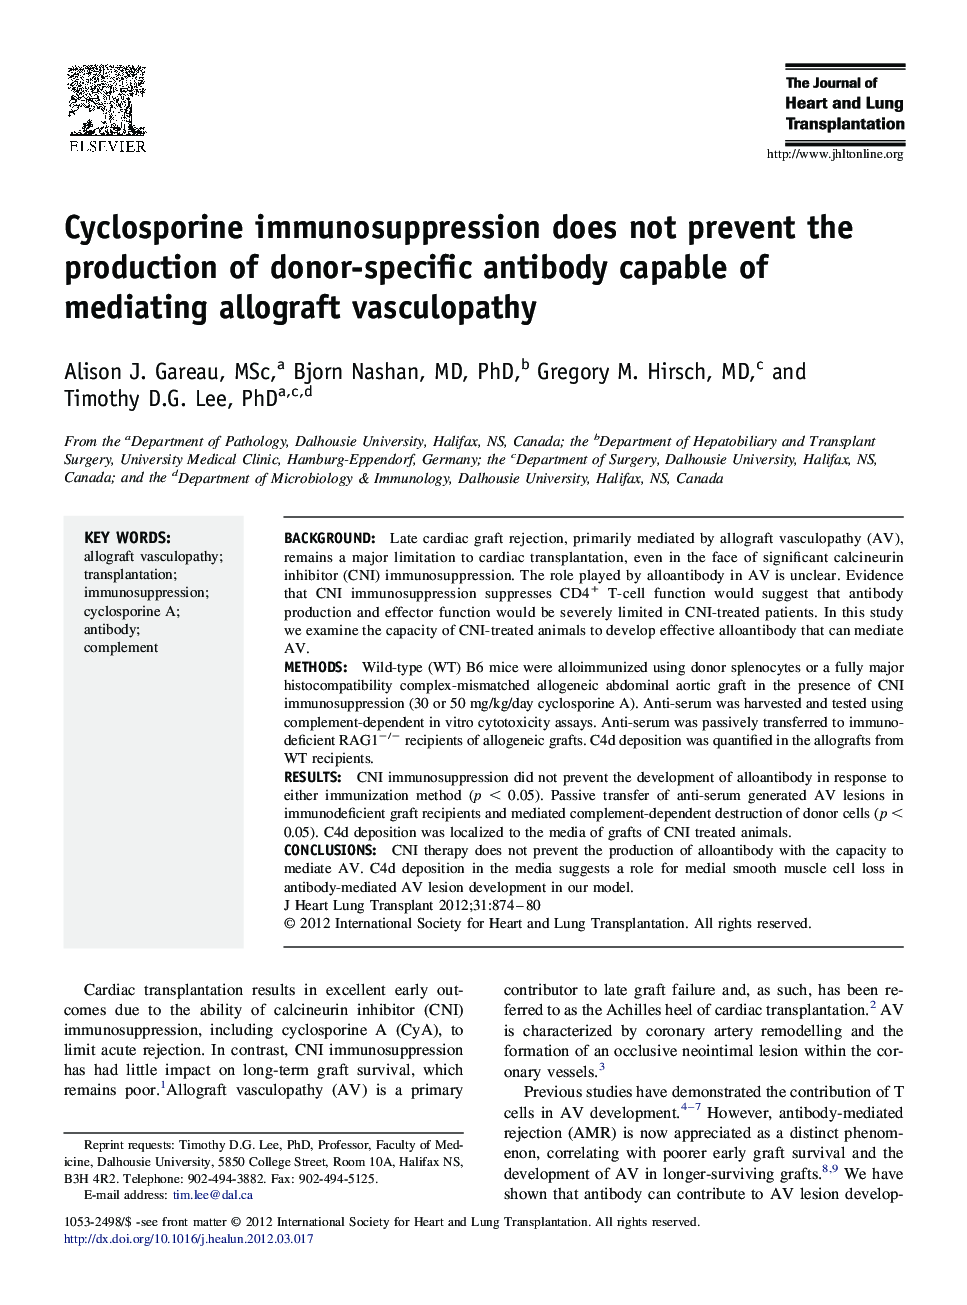 Cyclosporine immunosuppression does not prevent the production of donor-specific antibody capable of mediating allograft vasculopathy